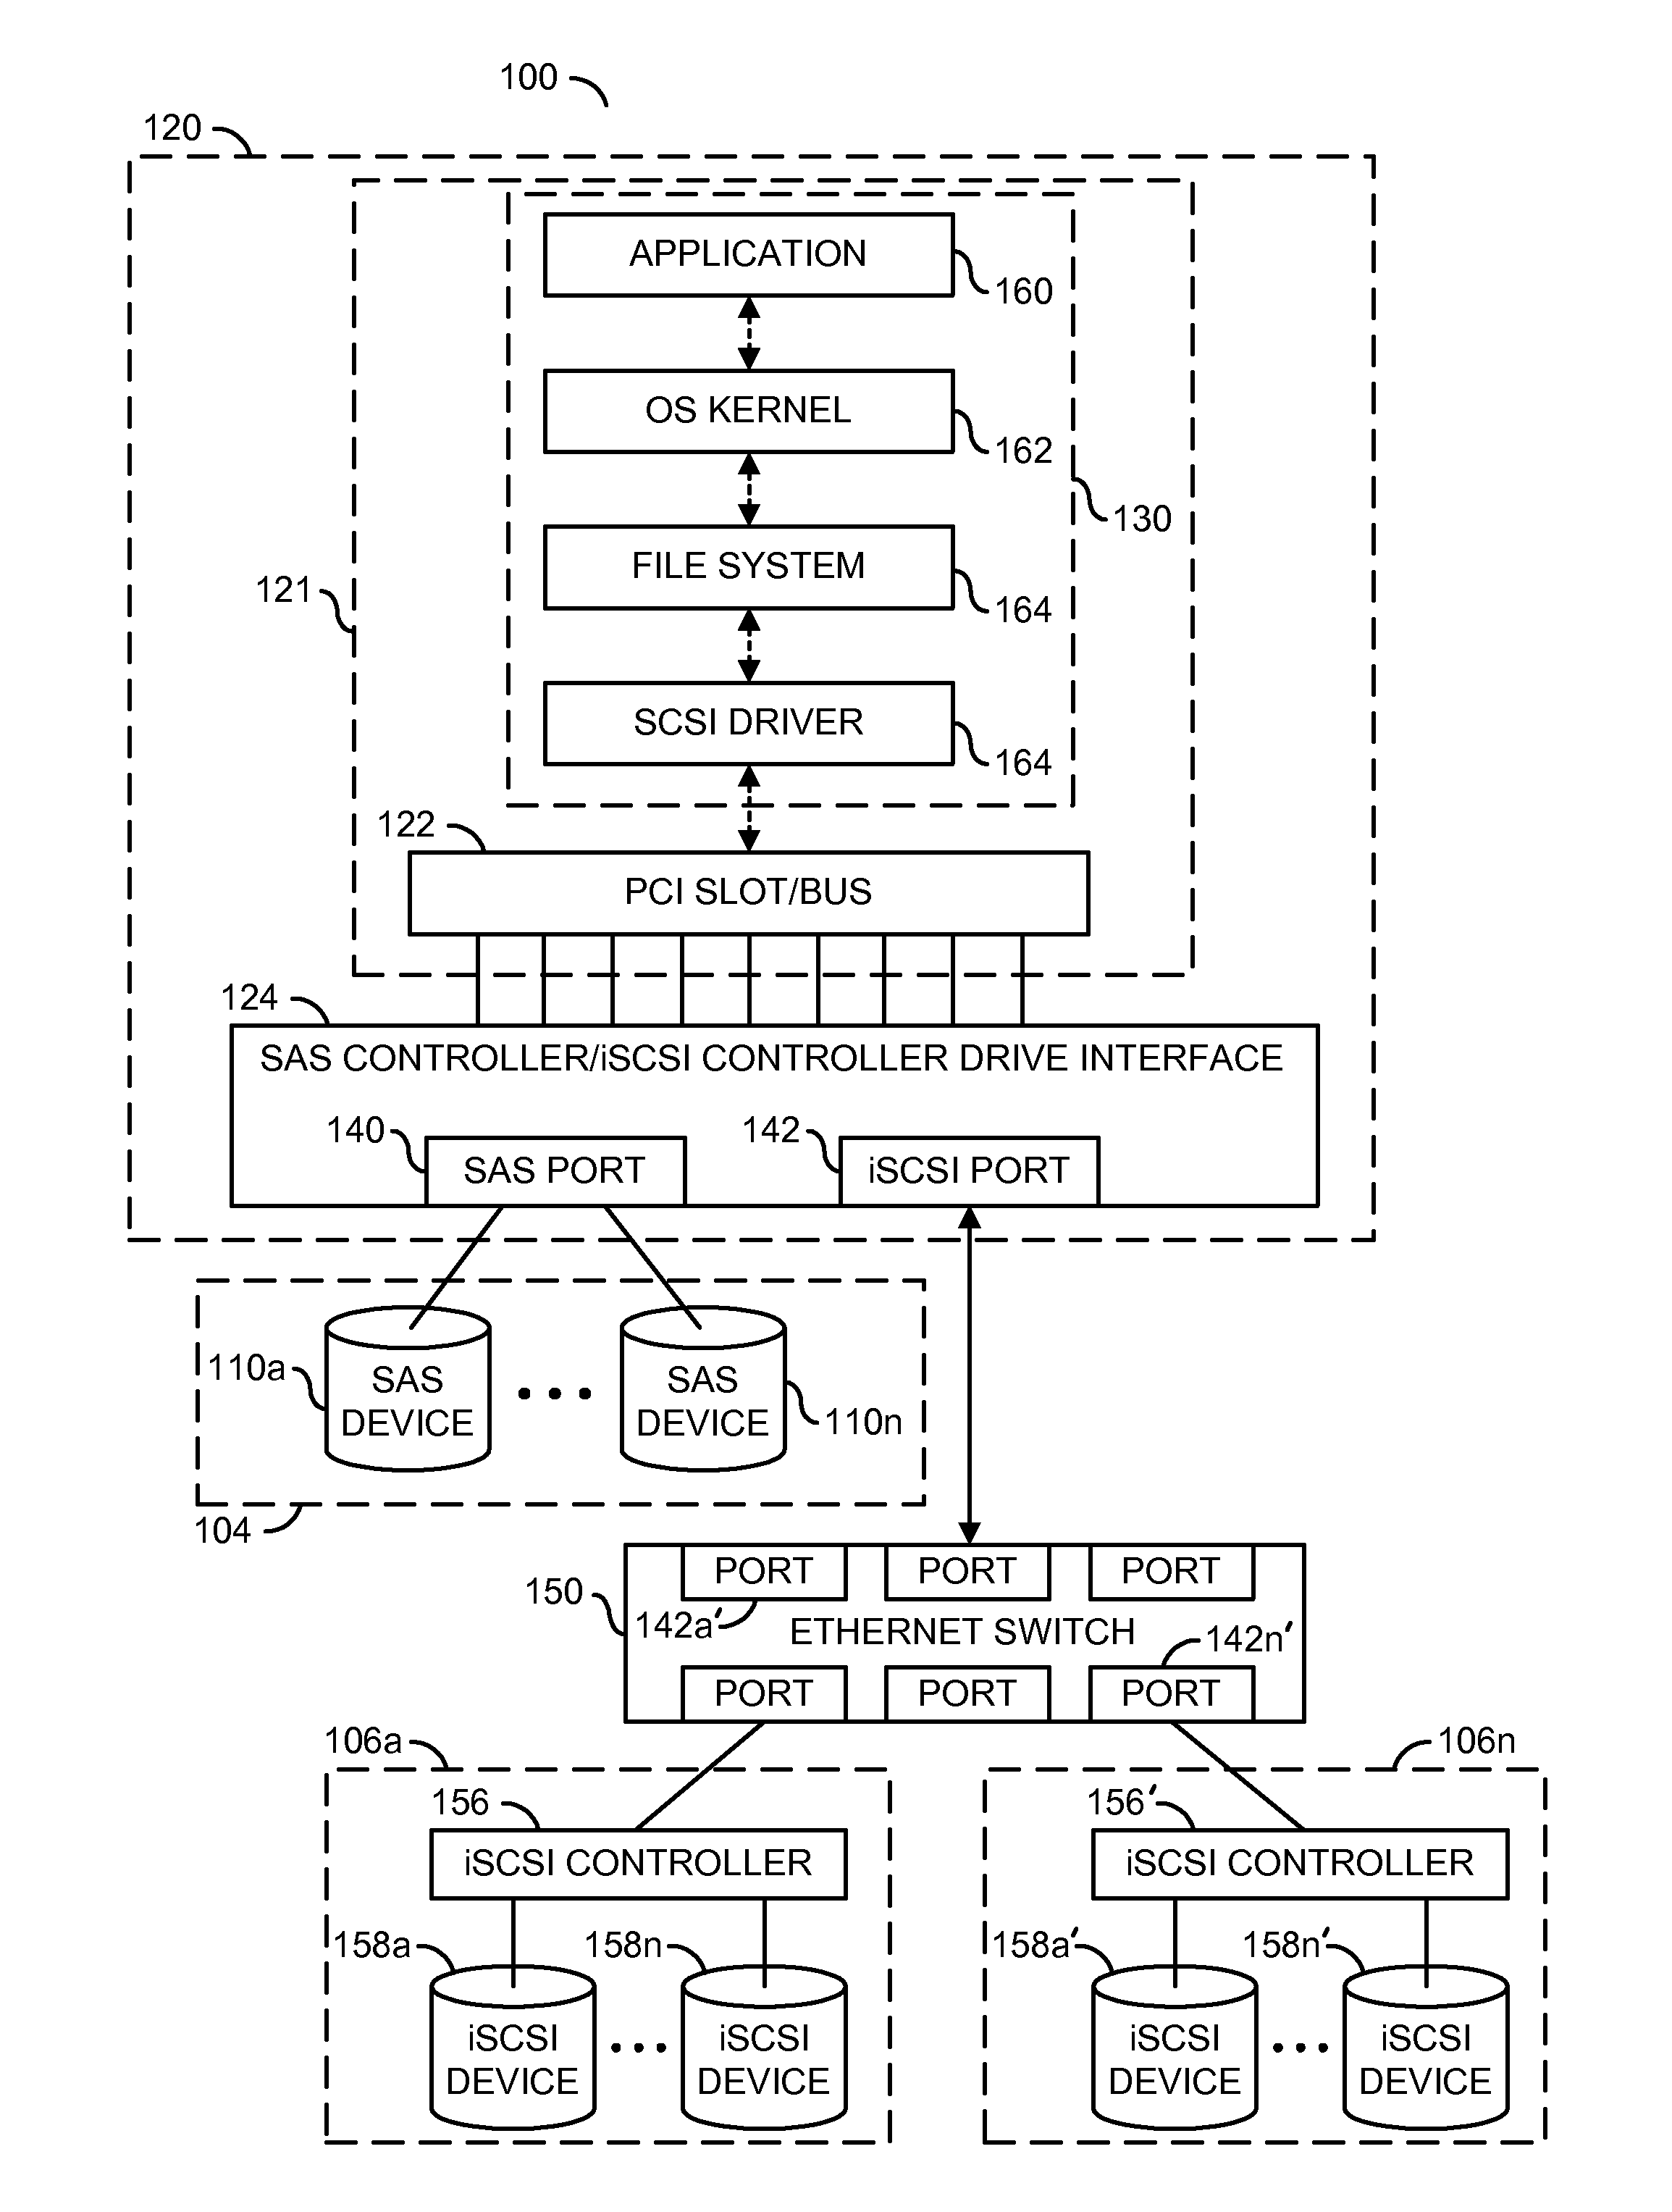 Method and system for coupling serial attached SCSI (SAS) devices and internet small computer system internet (iSCSI) devices through single host bus adapter